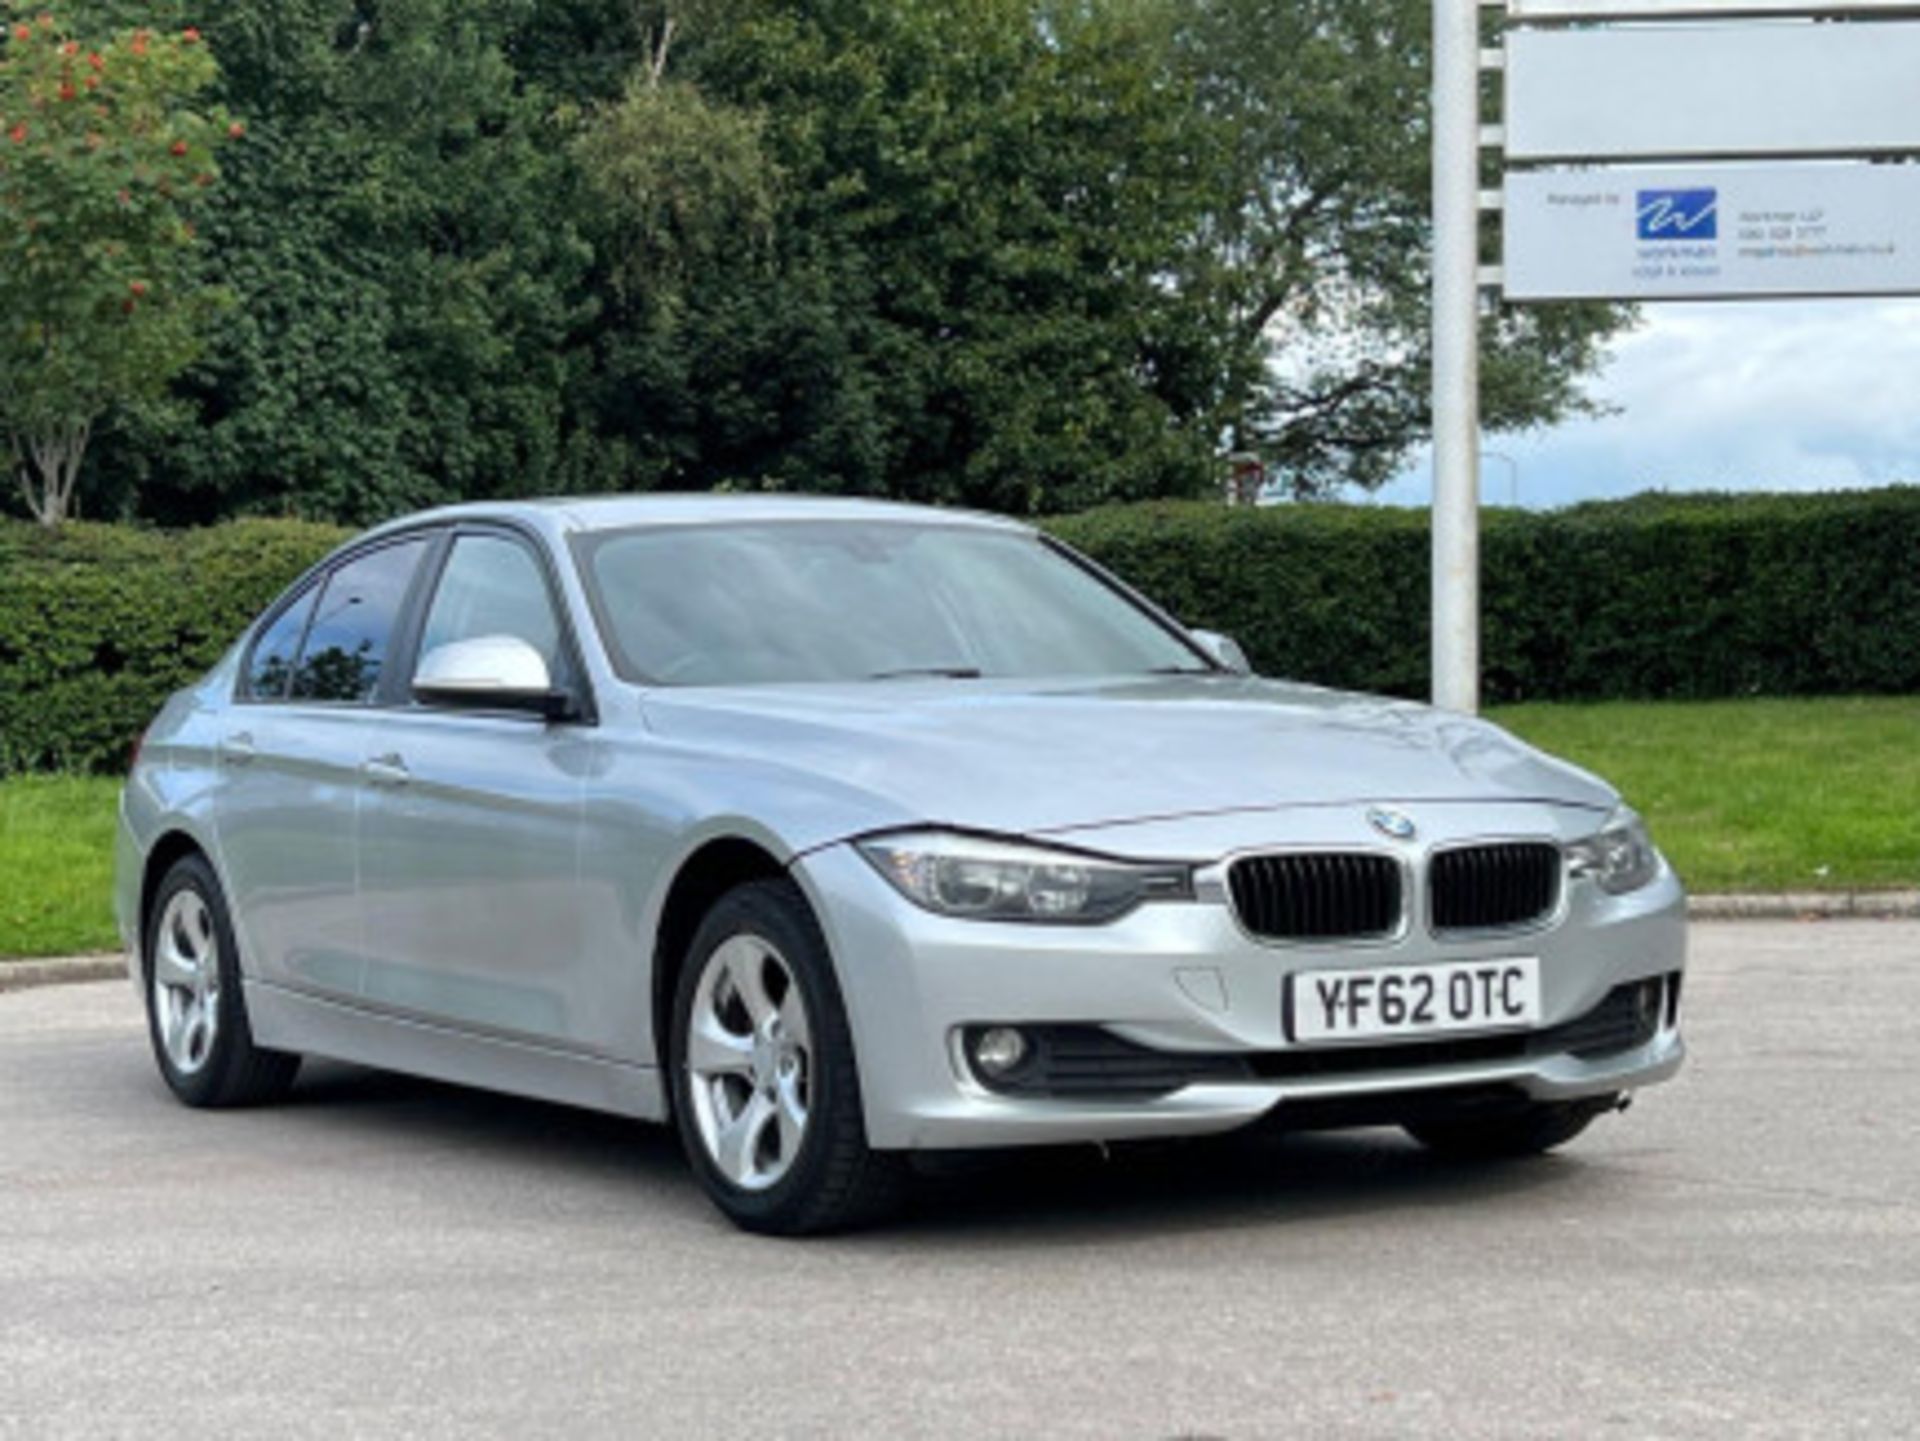 BMW 3 SERIES 2.0 DIESEL ED START STOP - A WELL-MAINTAINED GEM >>--NO VAT ON HAMMER--<< - Image 133 of 229